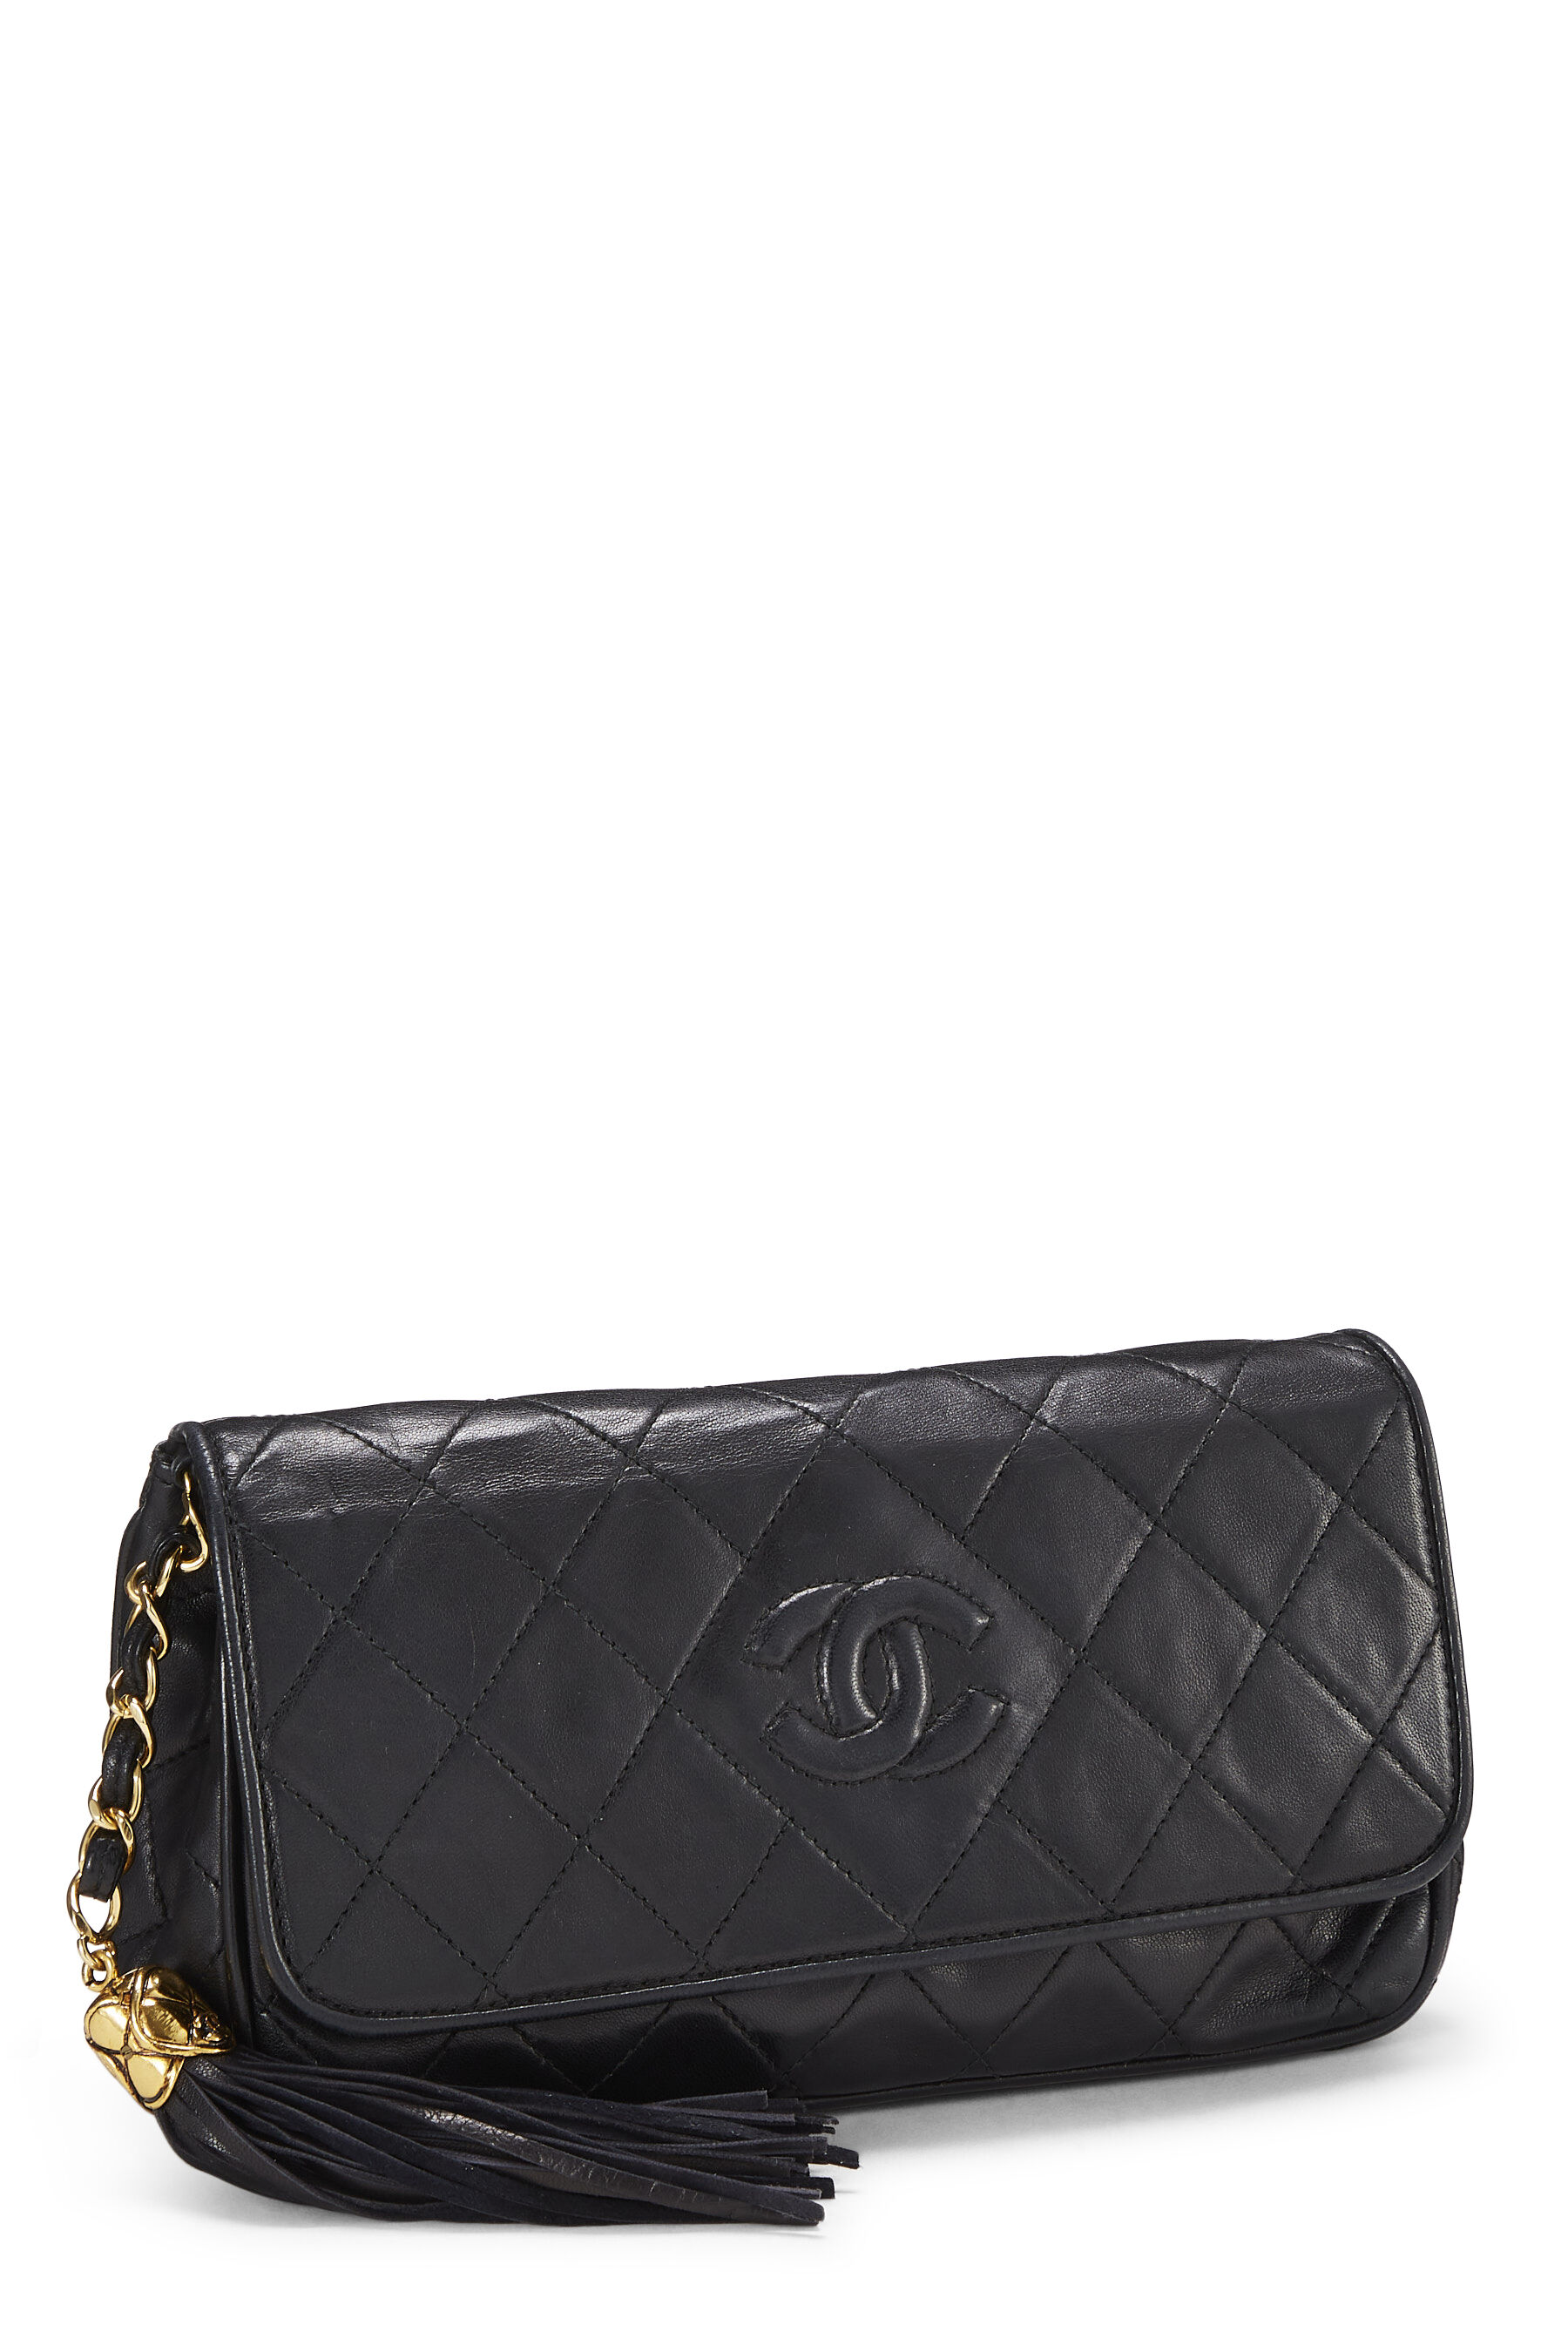 Chanel Vintage Cut Out Chain Handle Bag Quilted Lambskin Medium